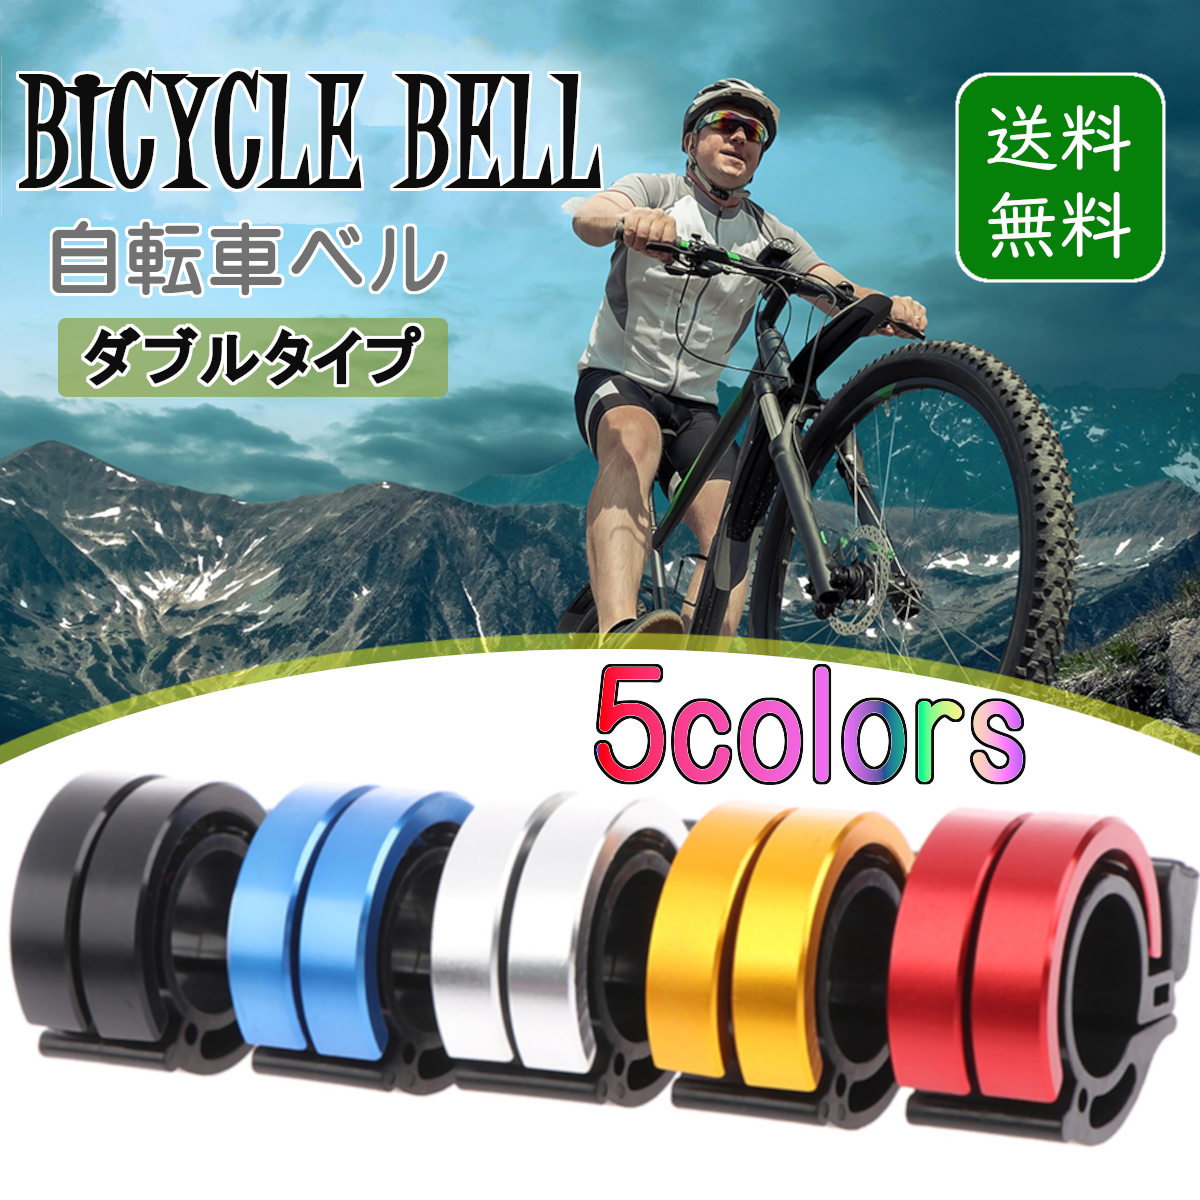  bicycle bell cycle bell double type stylish compact mountain bike road bike cross bike touring child light weight shopping installation easy 